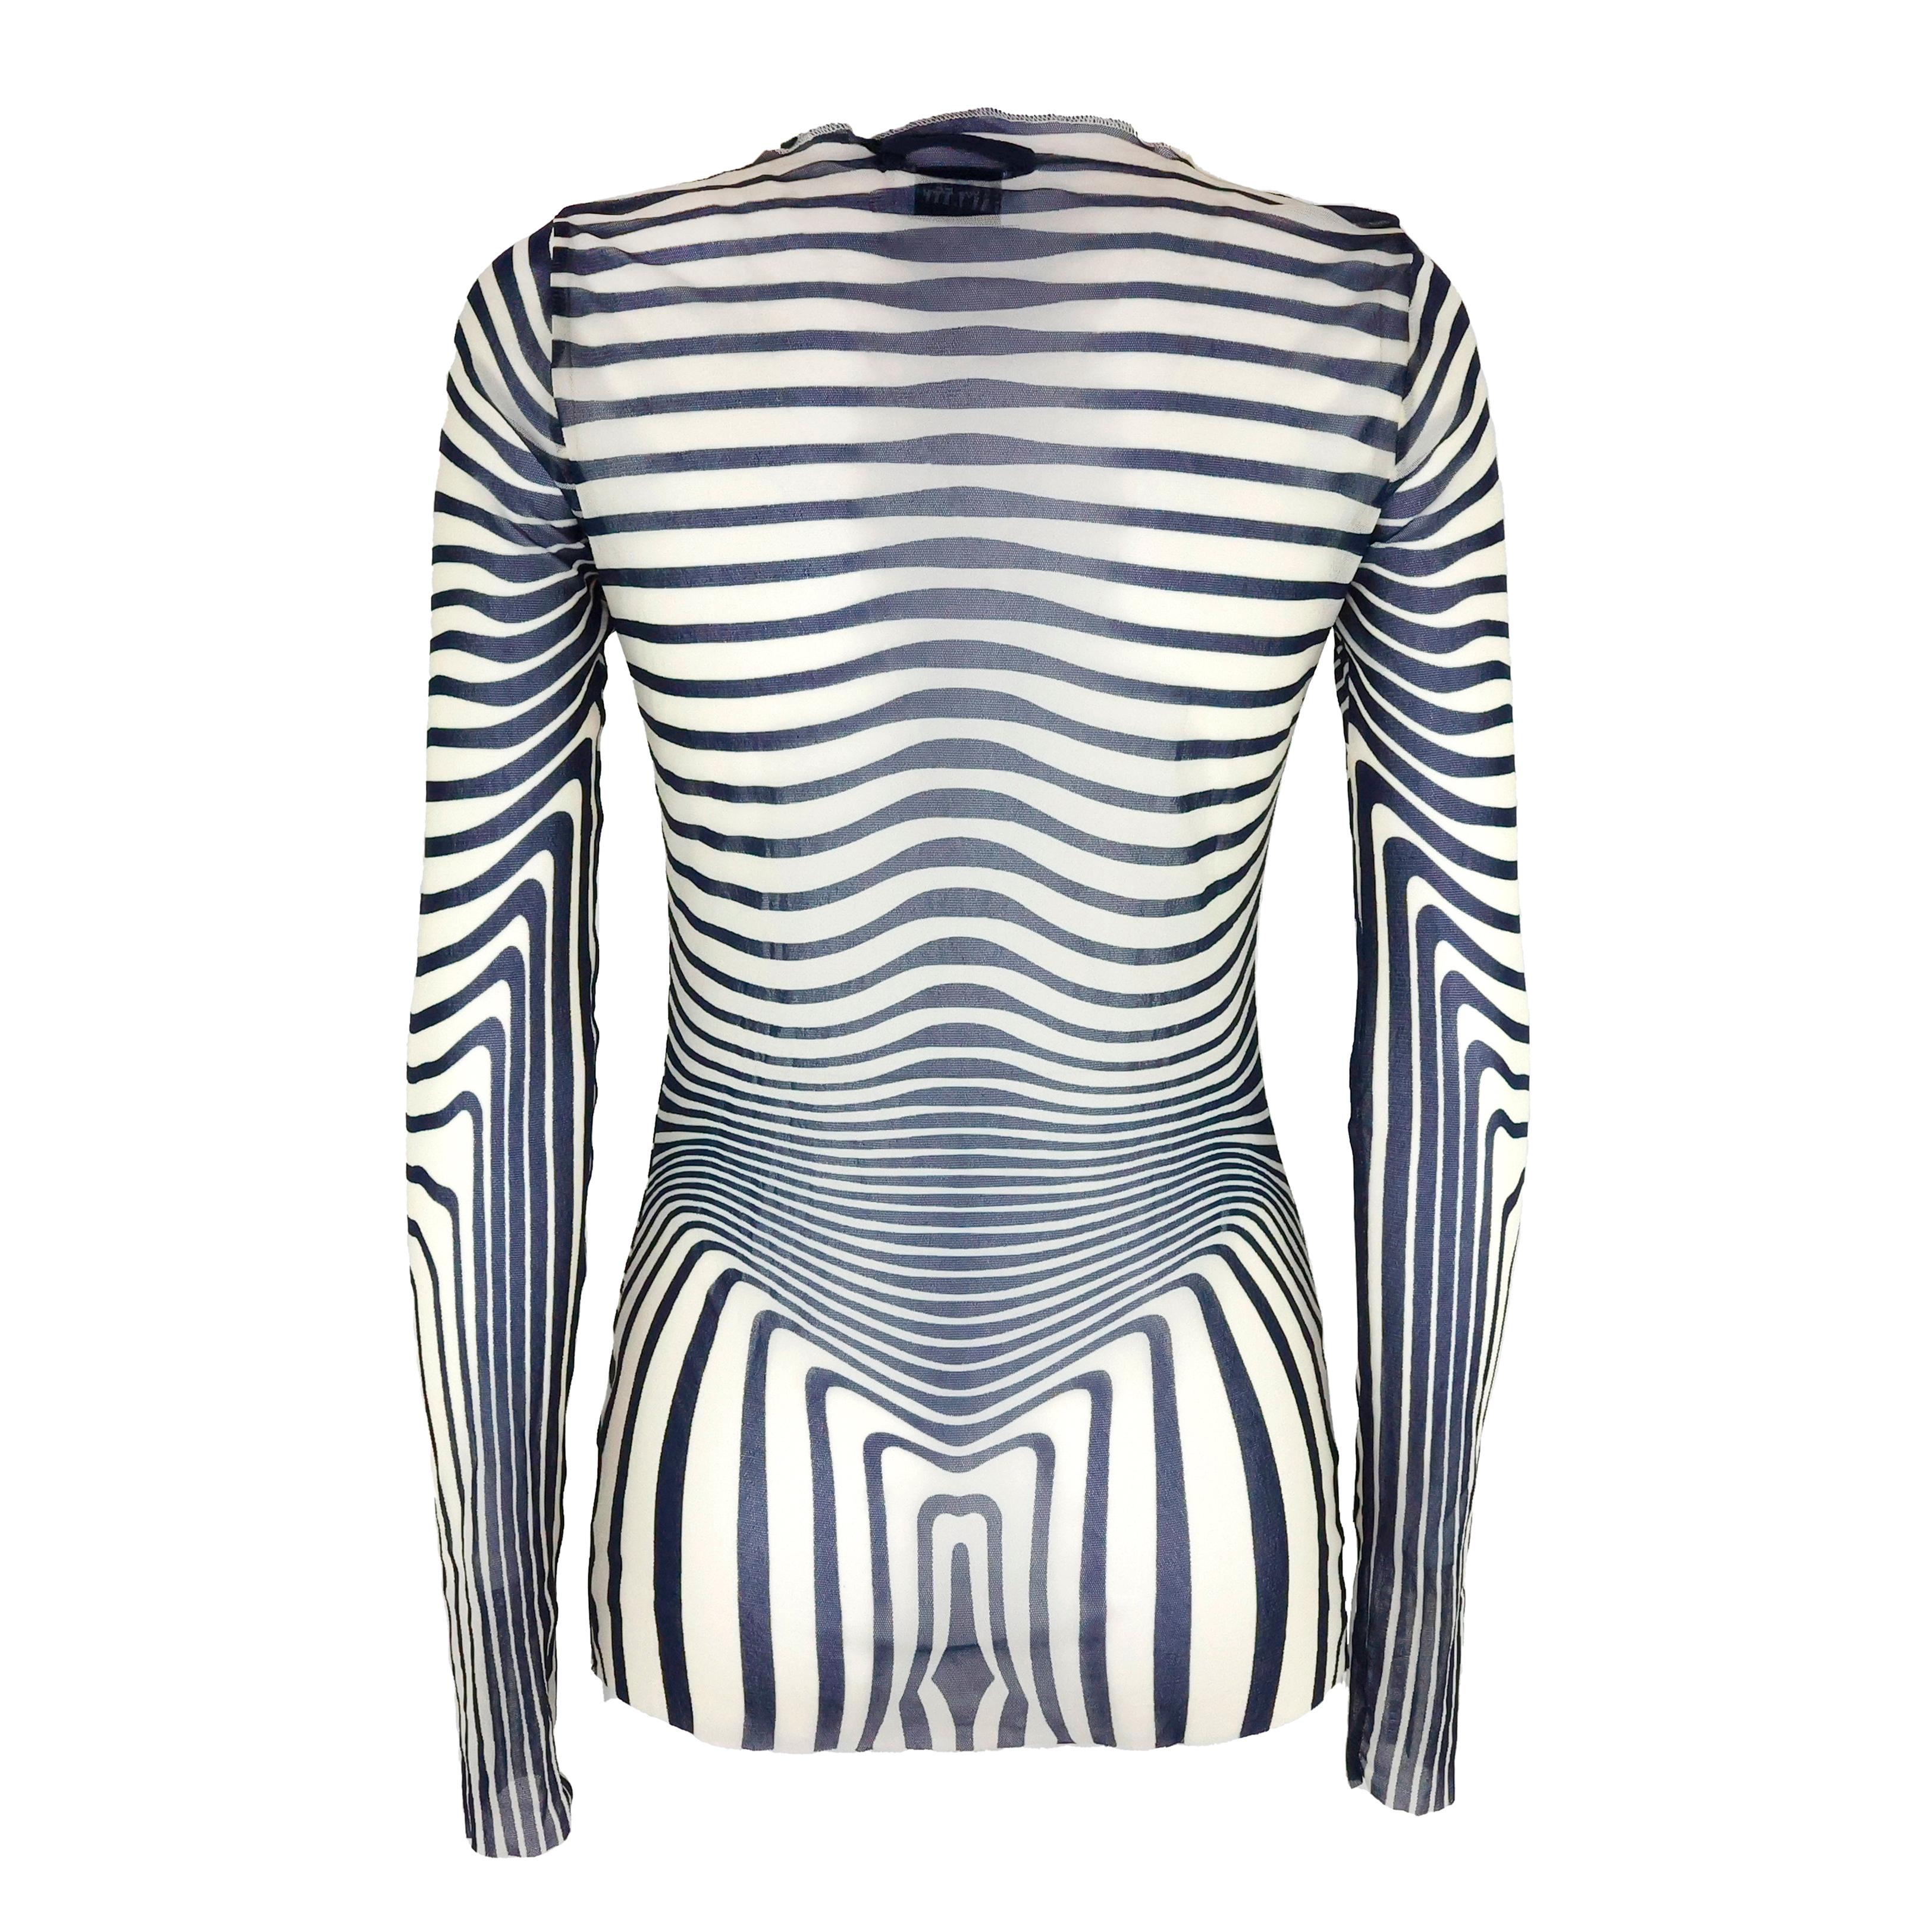 Jean Paul Gaultier Cyberbaba printed top in stretchy mesh, color ivory and dark blue. Size XL (but also suitable for S/M/L as it is stretchy).


Condition:
New, with tag.